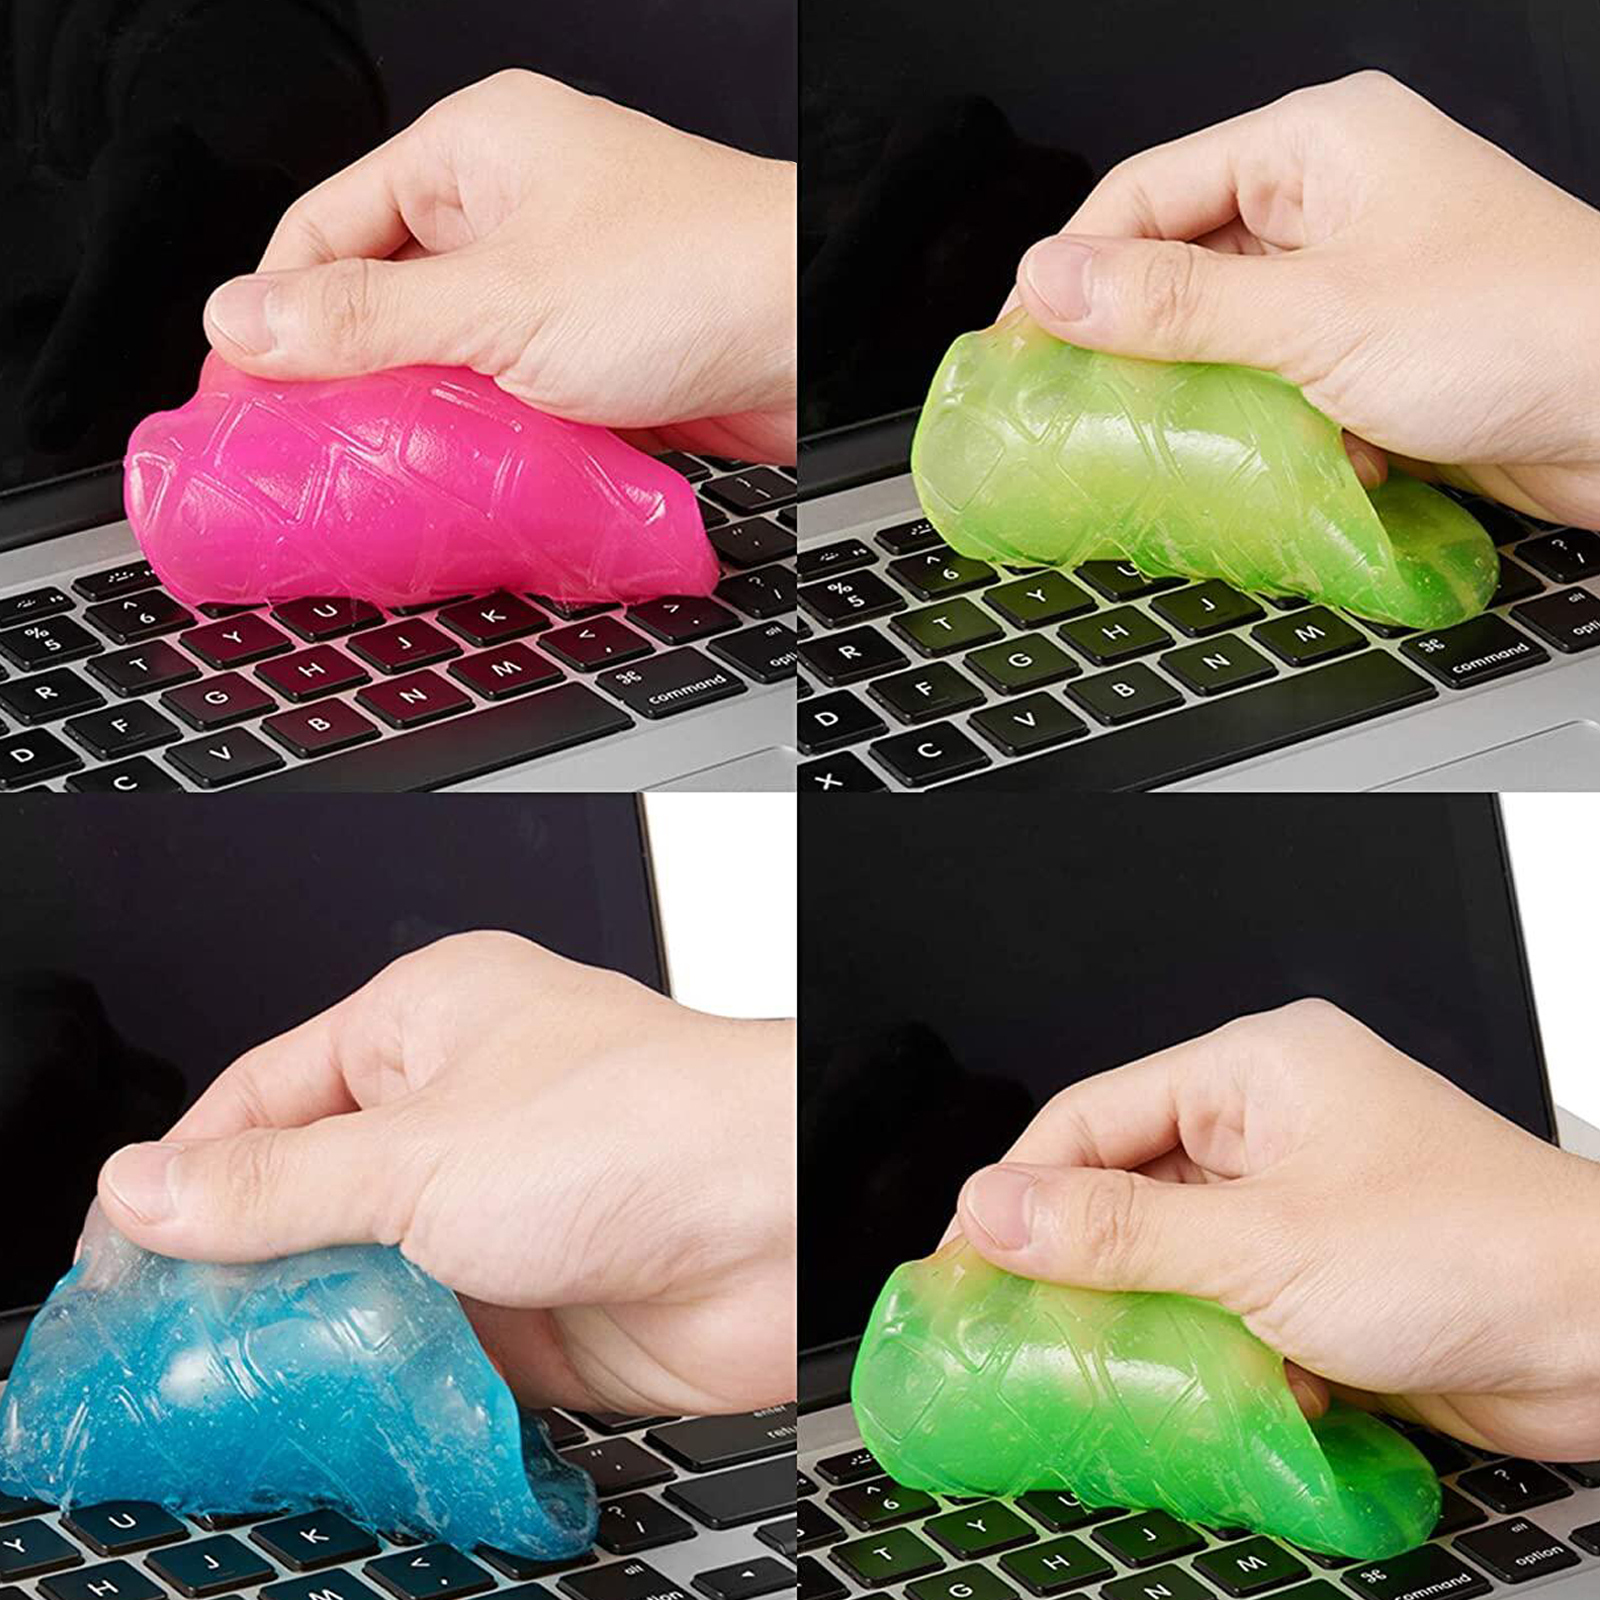 keyboard cleaning putty recipe